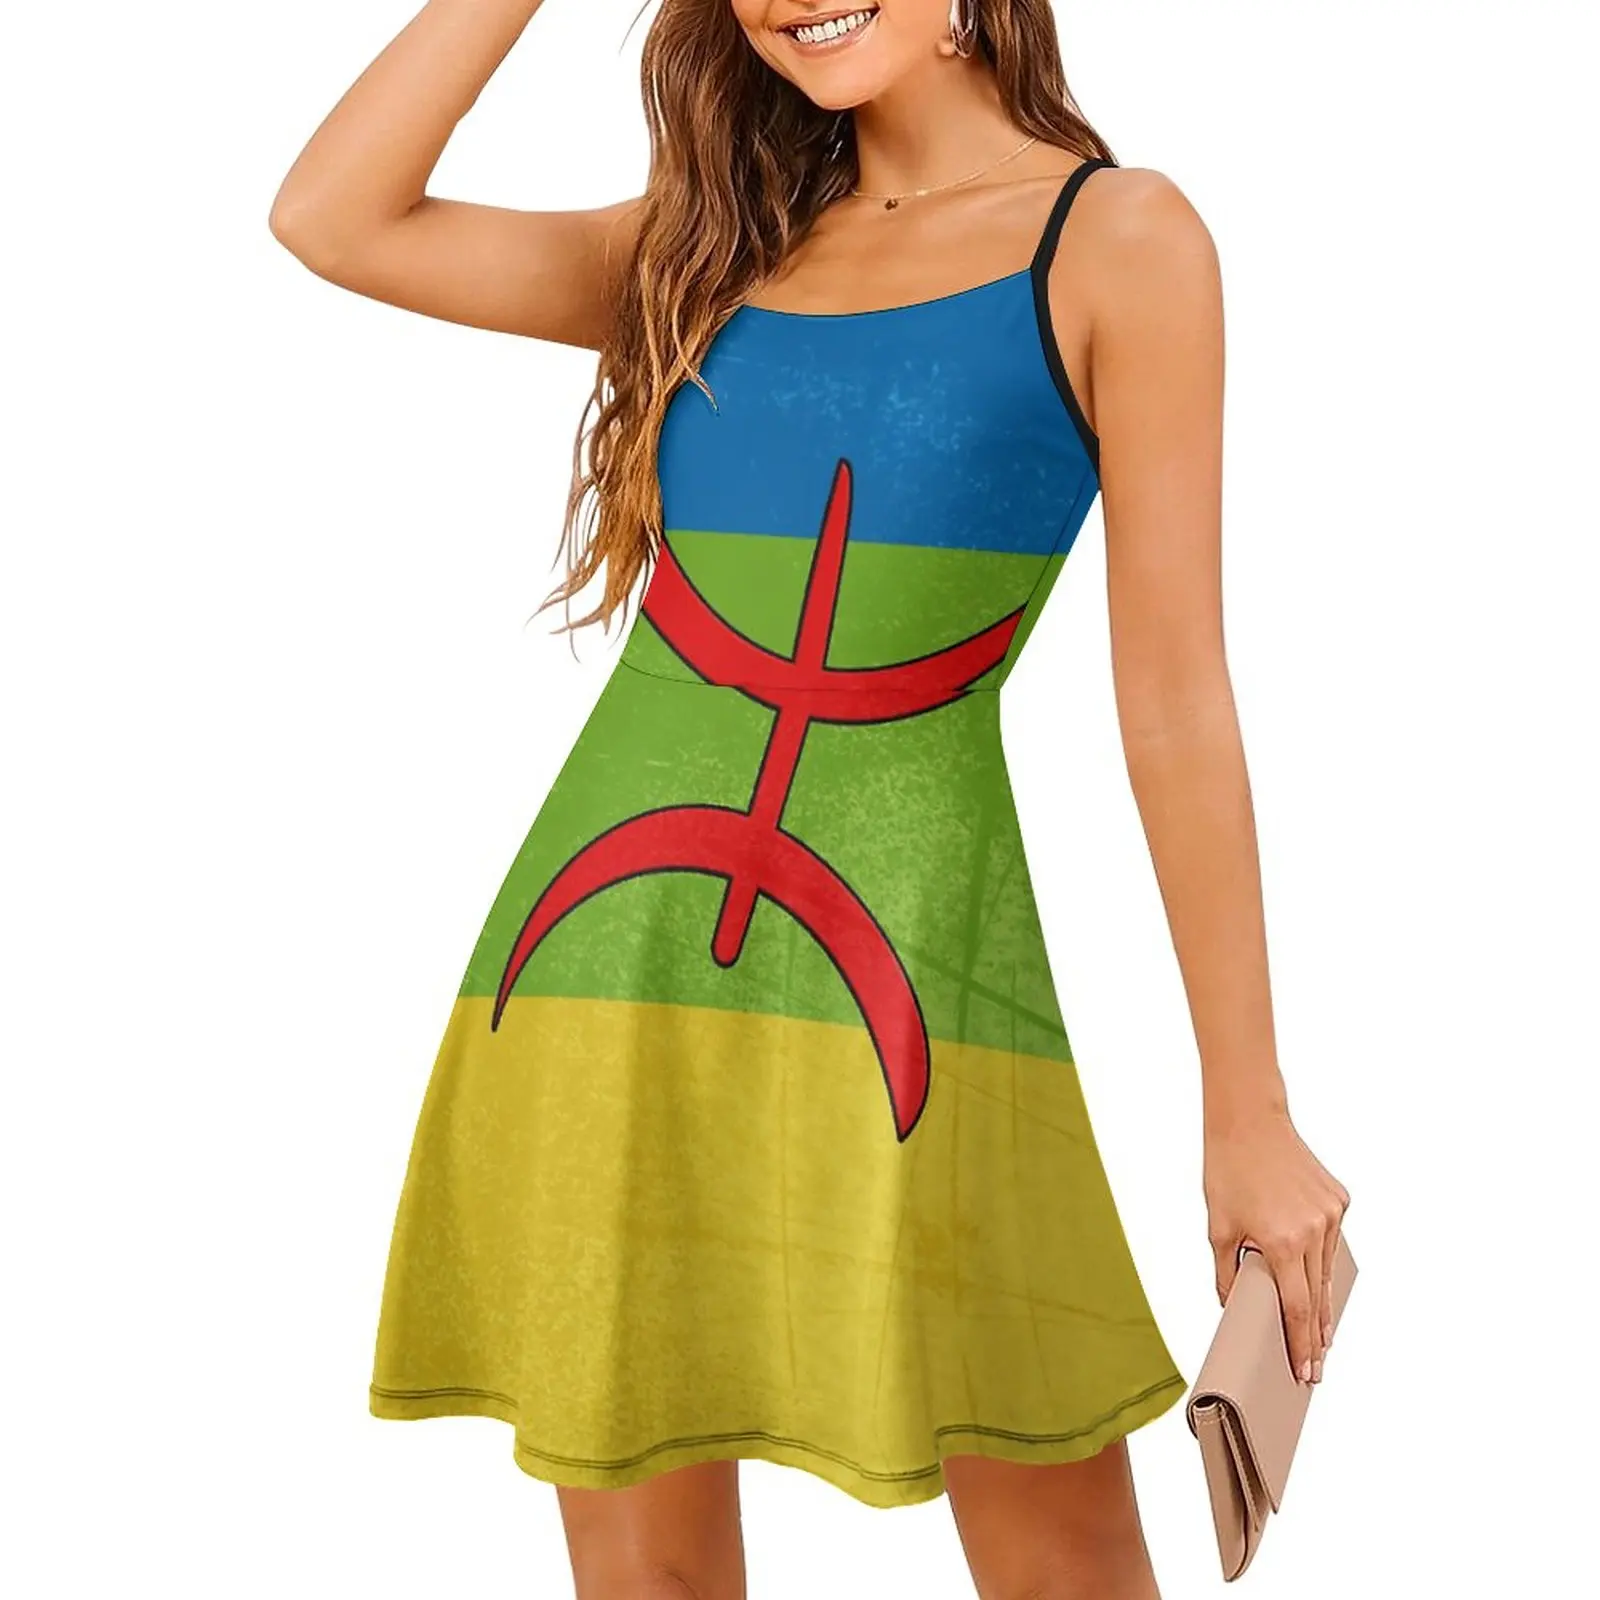 

Amazigh Flag - Berber Flag43913637 Women's Sling Dress Creative Sexy Woman's Clothing Funny Novelty Cocktails The Dress